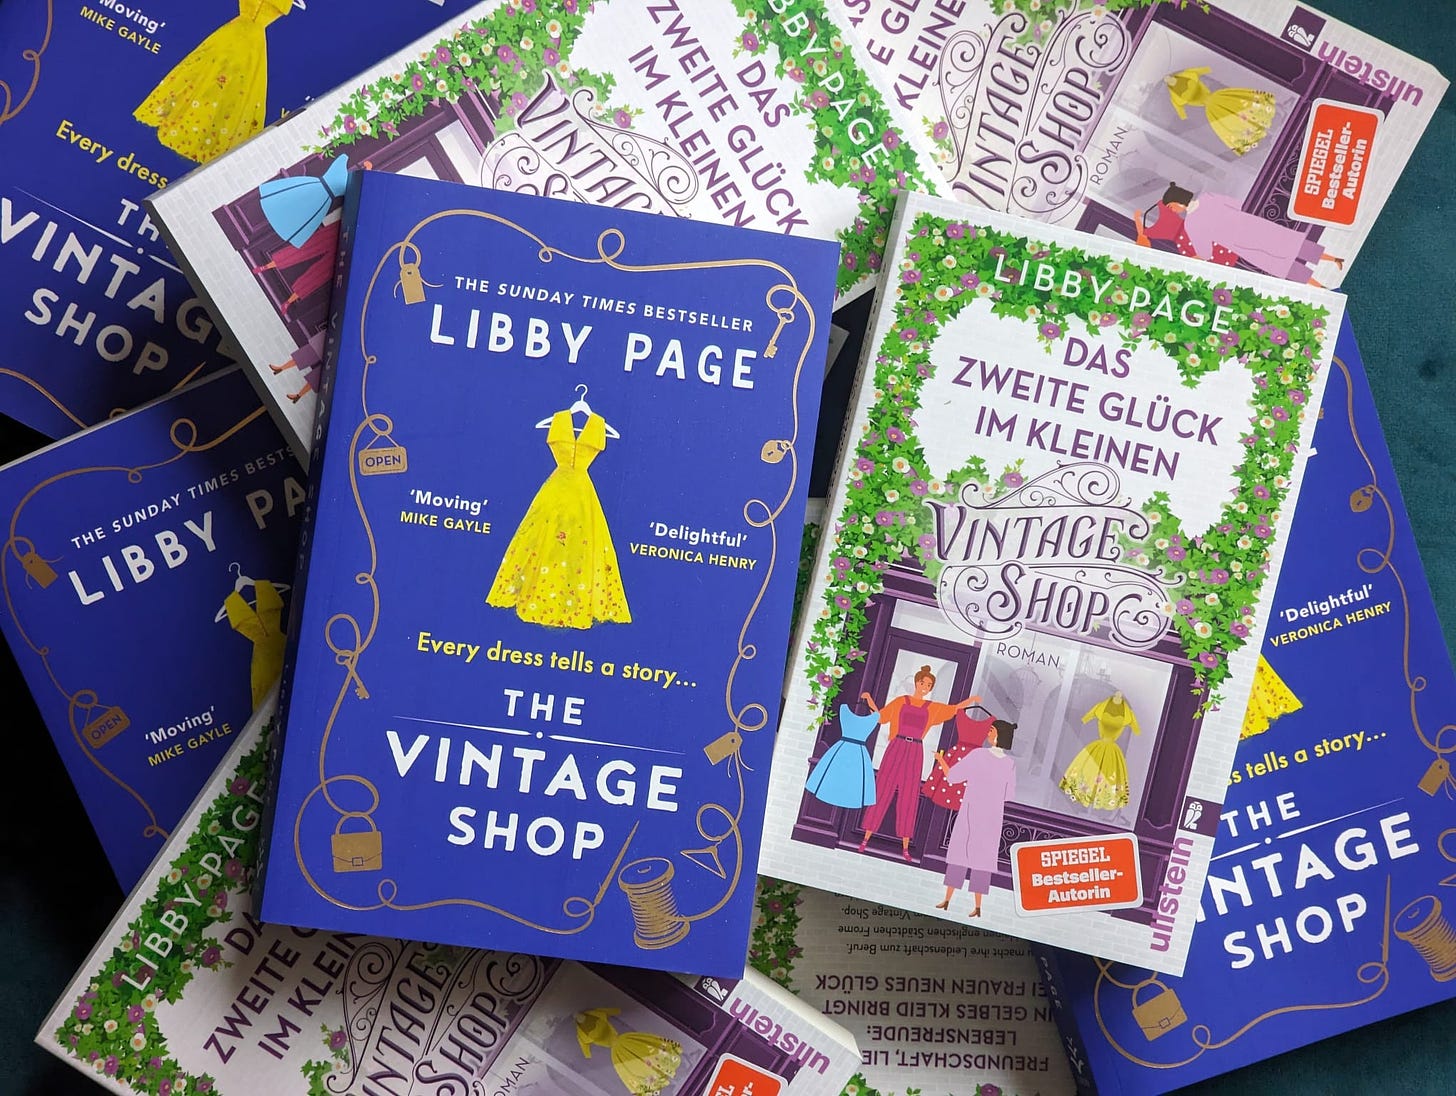 A pile of copies of The Vintage Shop in English and in German. The English version has a bright blue cover with a yellow dress in the middle. The German version shows a shopfront surrounded by flowers, with a yellow dress in the window and two figures looking at dresses.